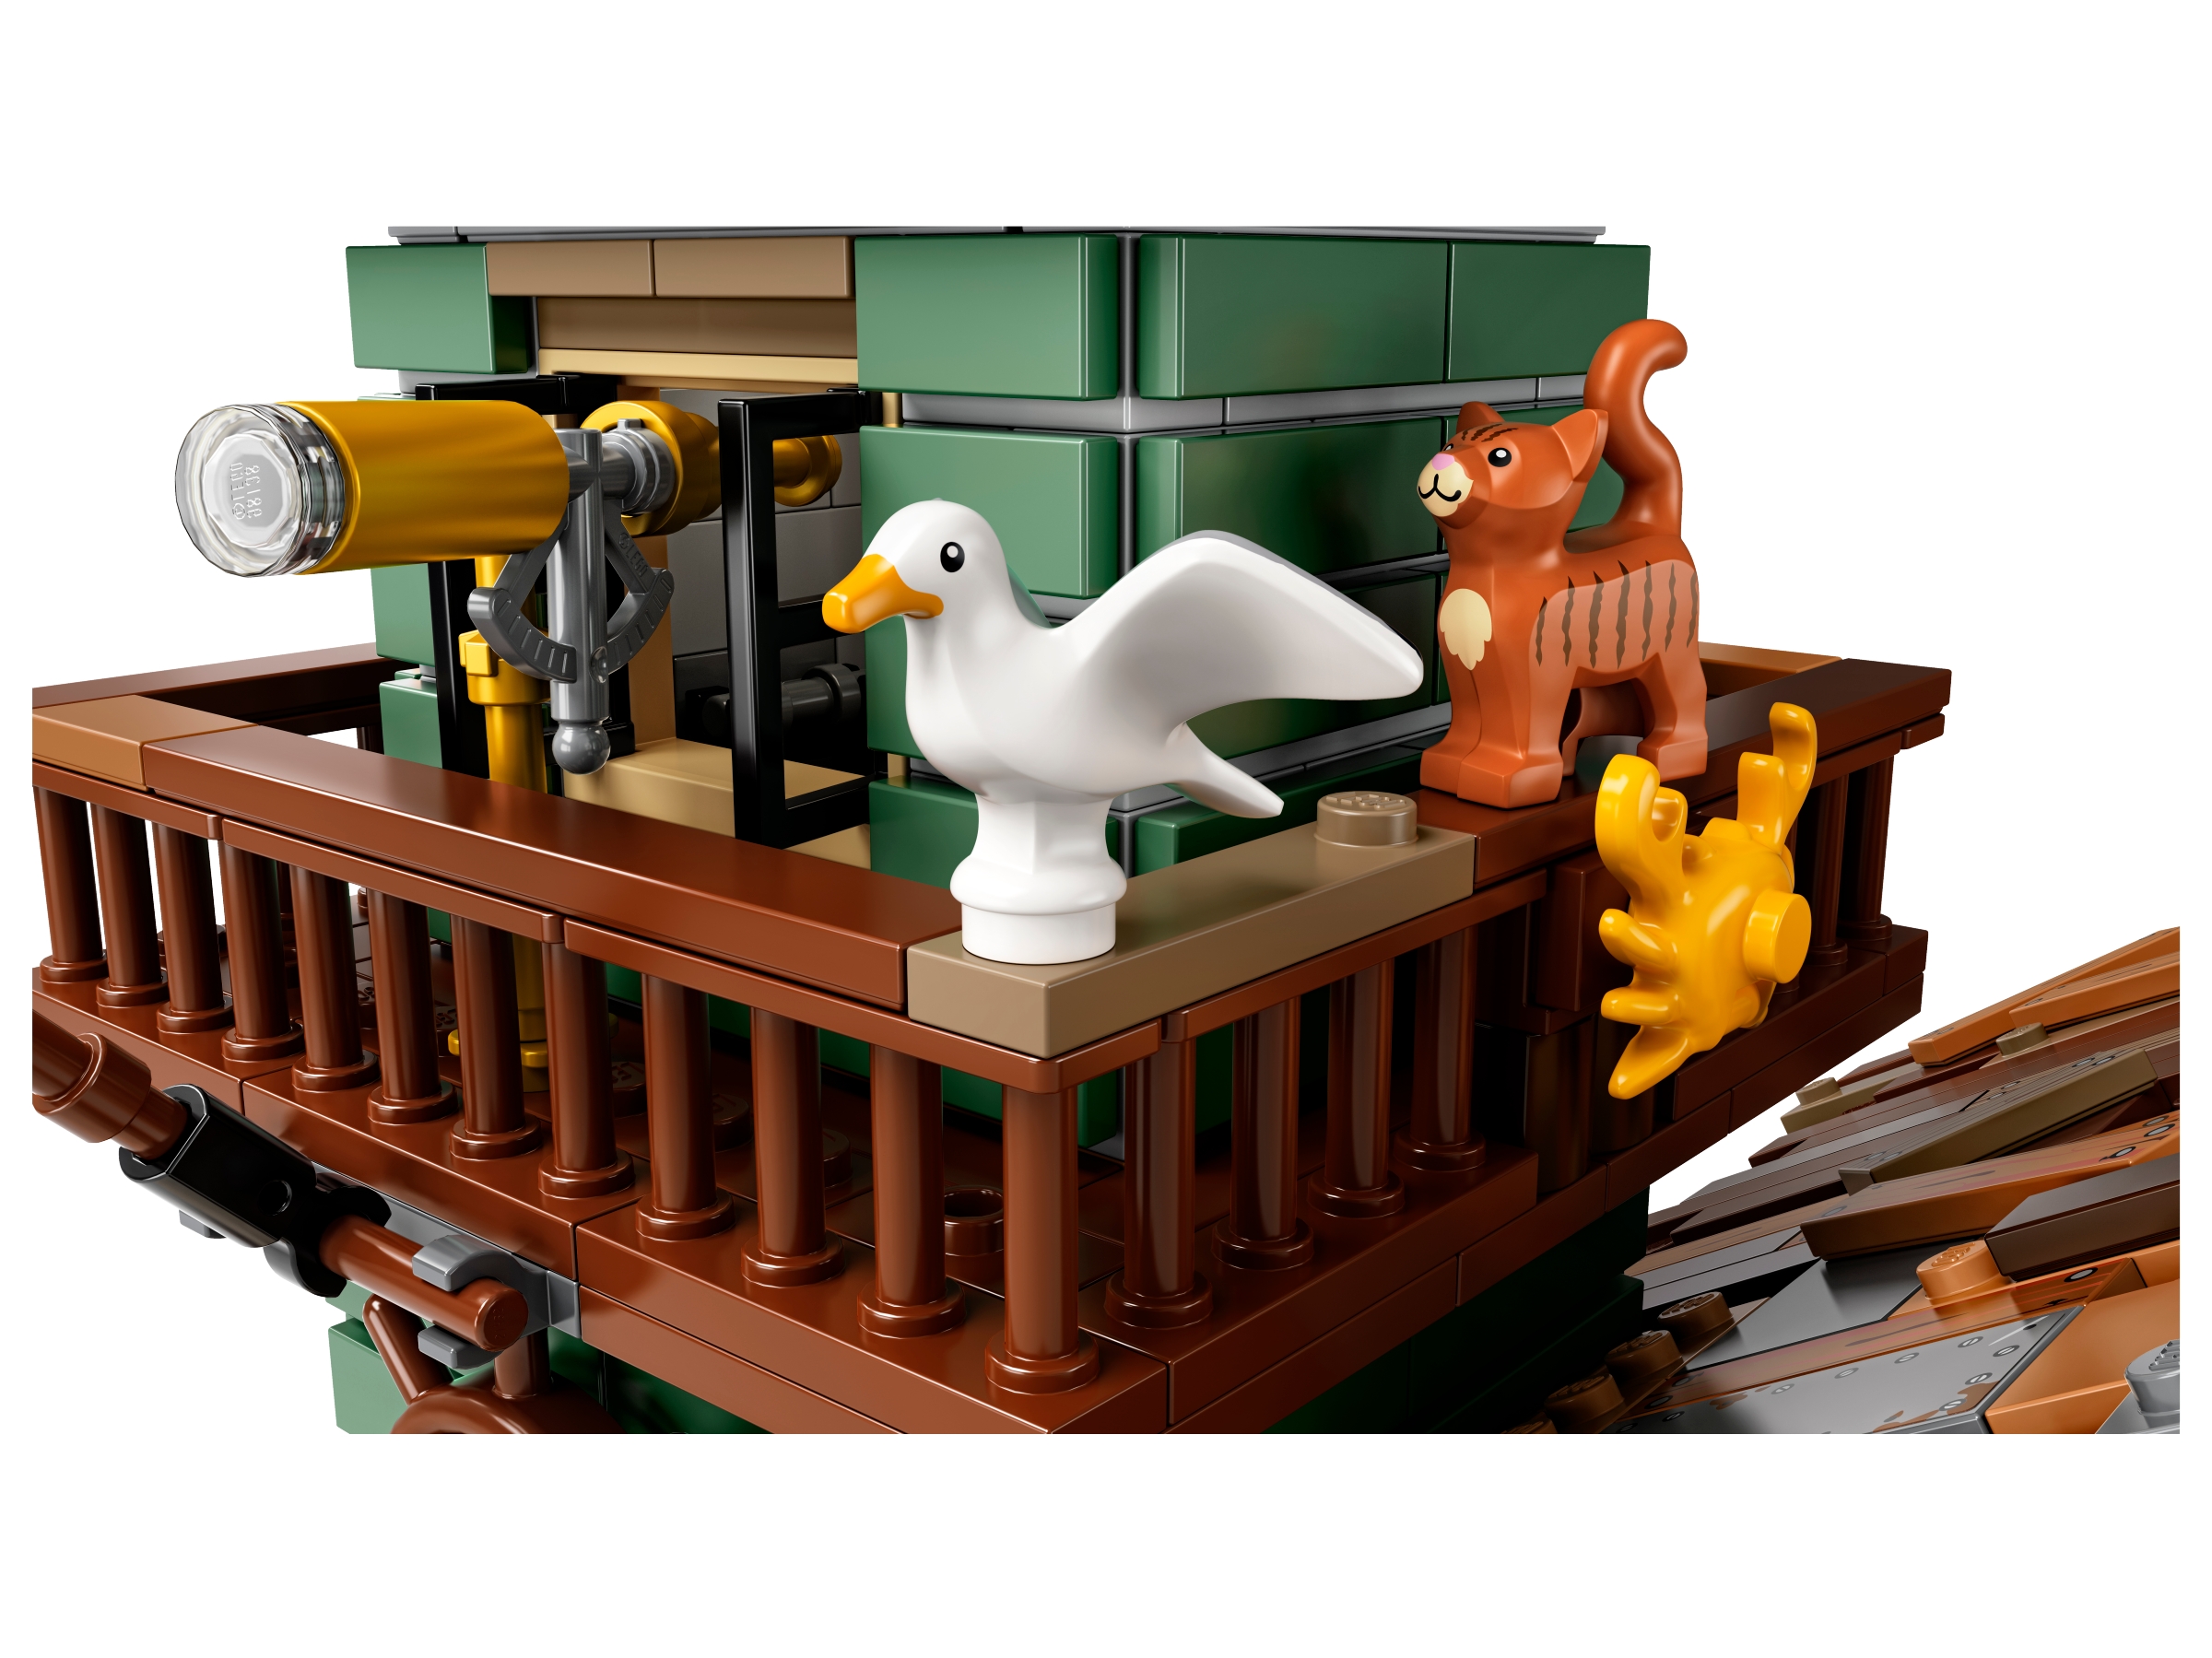 ZHEGAO Mini Building Blocks Set 00981 Fishing Village Cabin （21310 Old  Fishing Store） is designed with smaller building blocks. Any mini brick  fans? A more challenging small brick building designed for adults